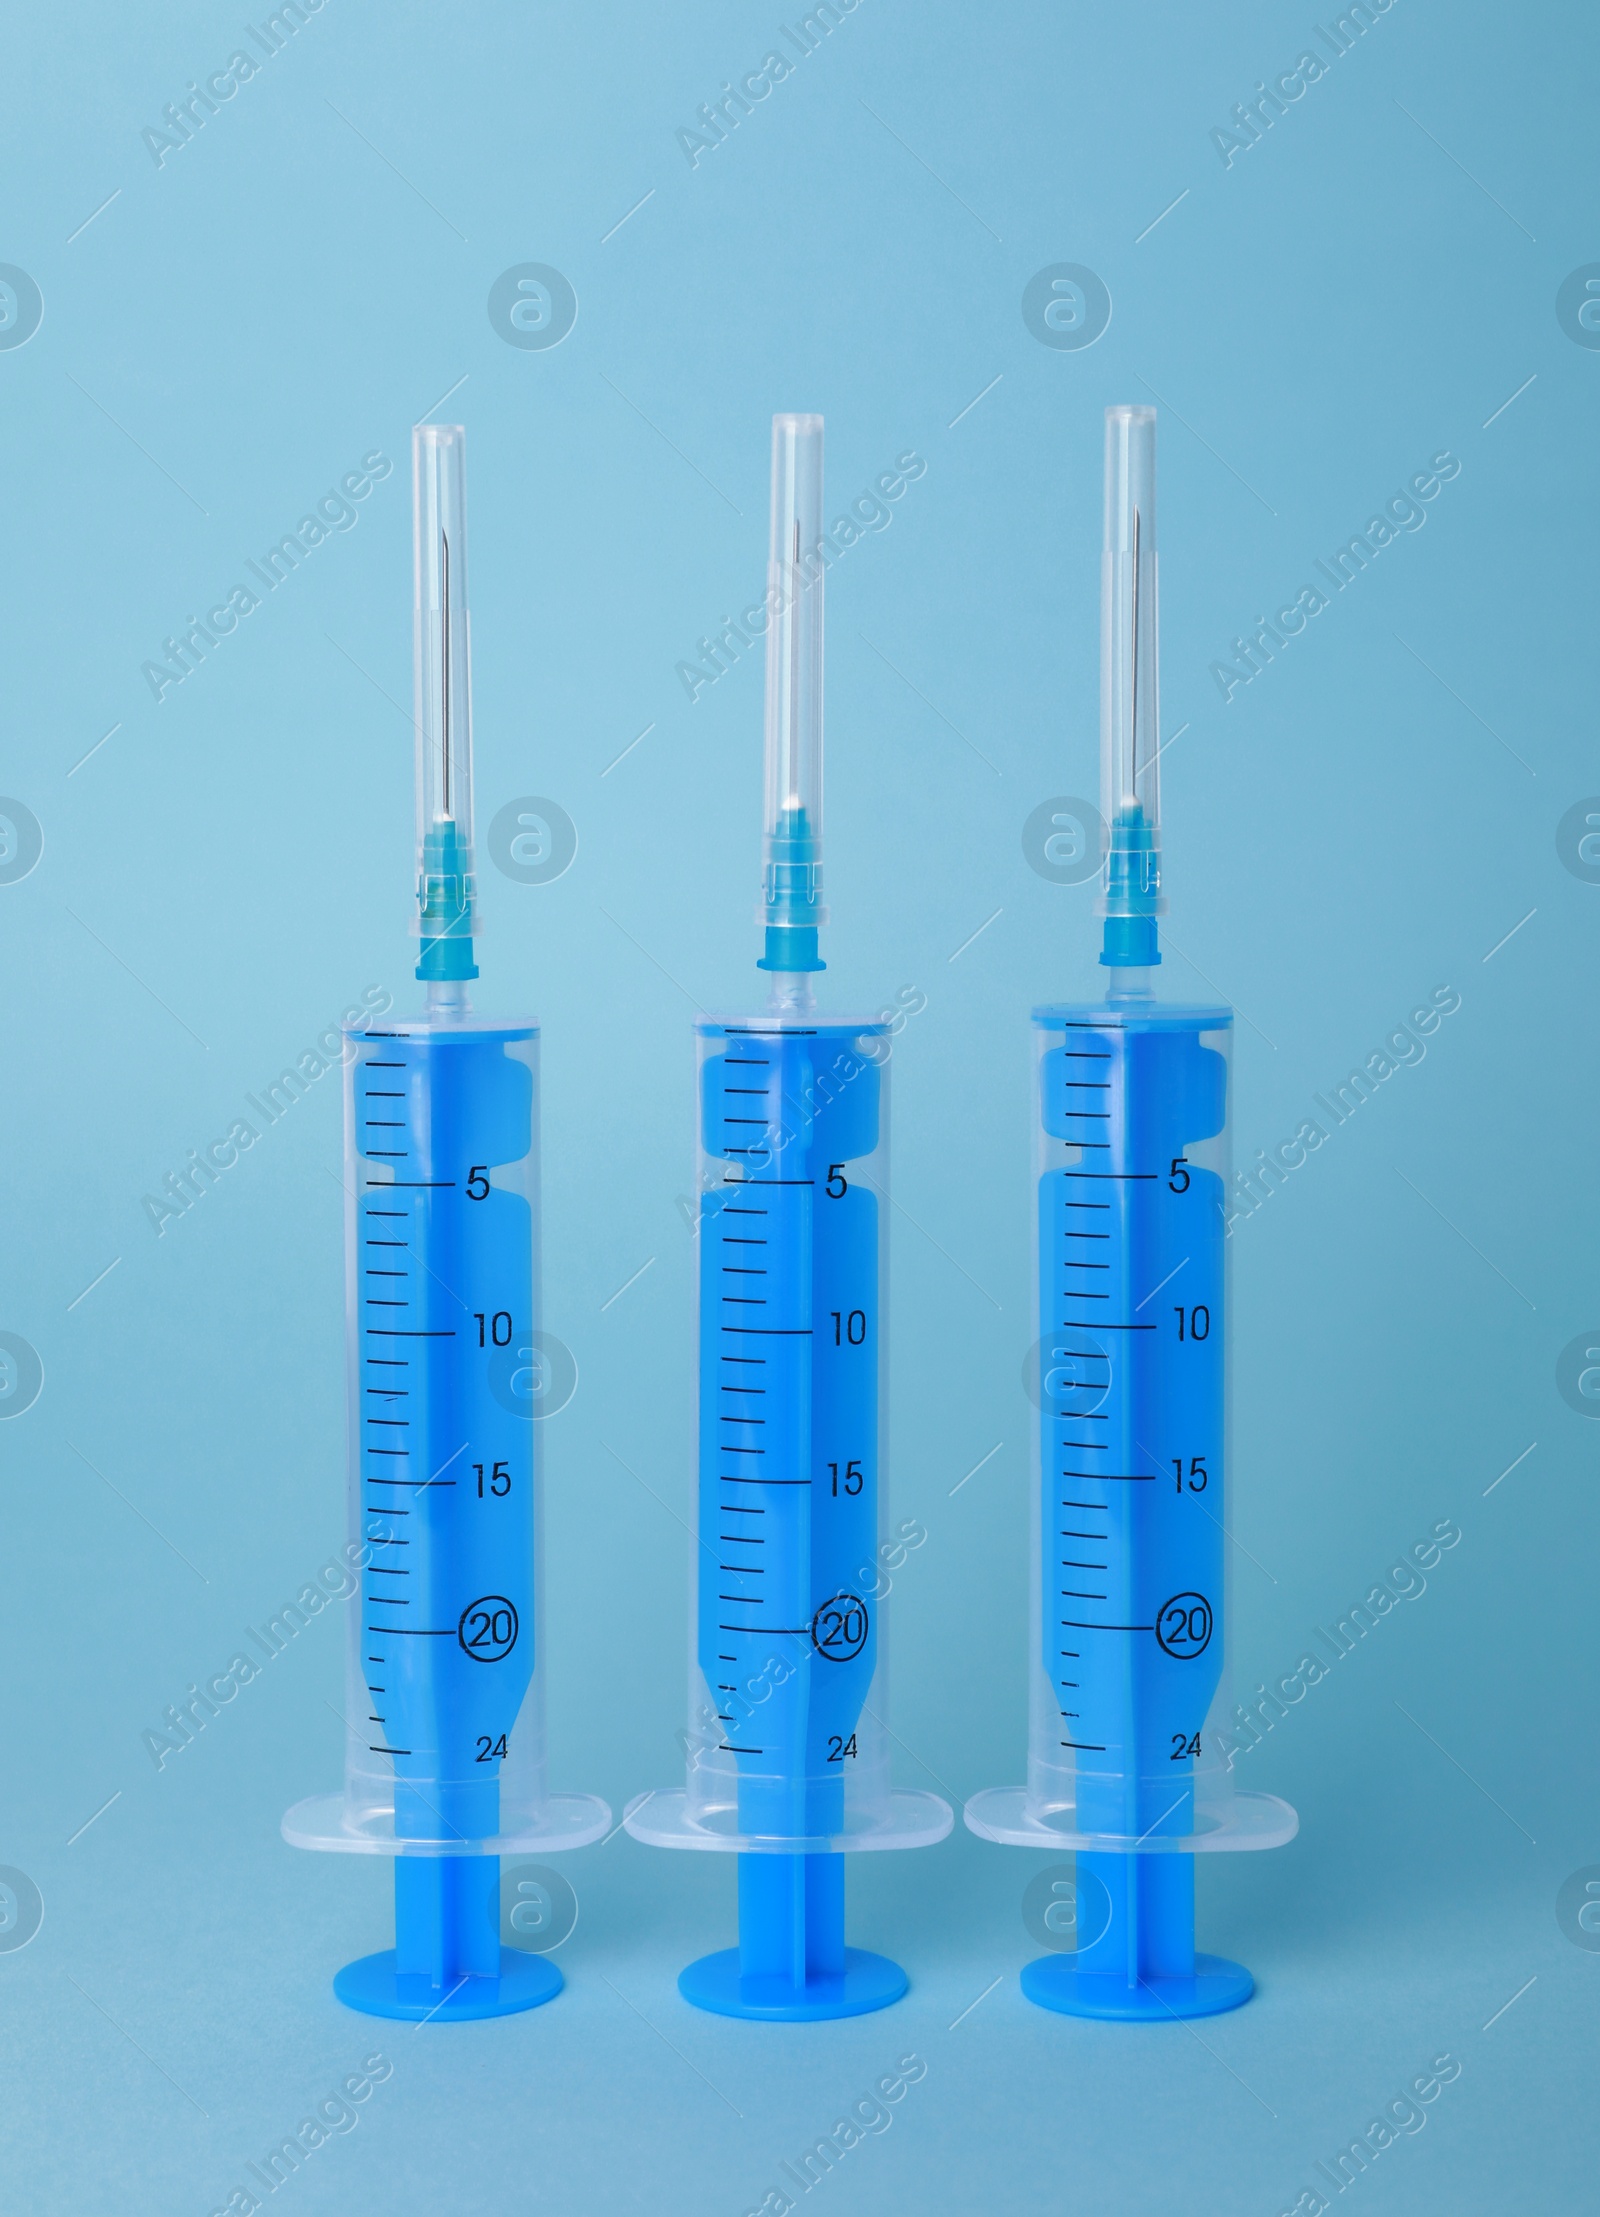 Photo of Disposable syringes with needles on light blue background